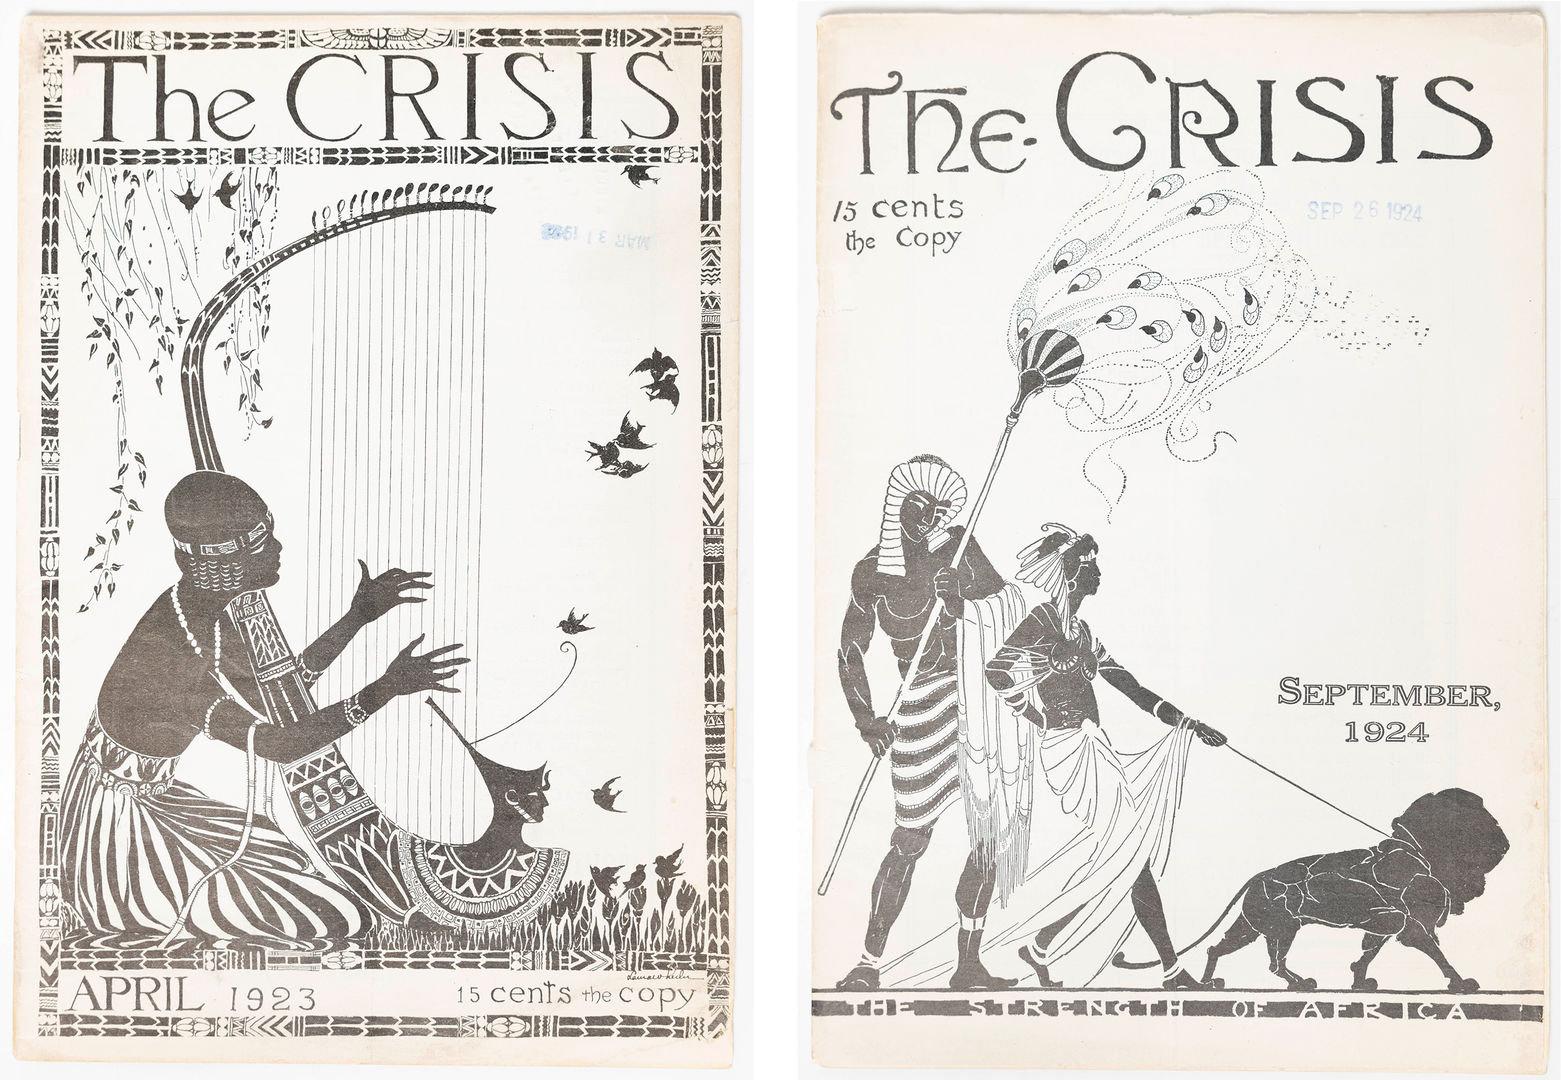 Two split image of black and white cover. A man sits playing instrument. The second image in black and white shows to men one fanning the leader, while the lead hold onto a lion on a leash